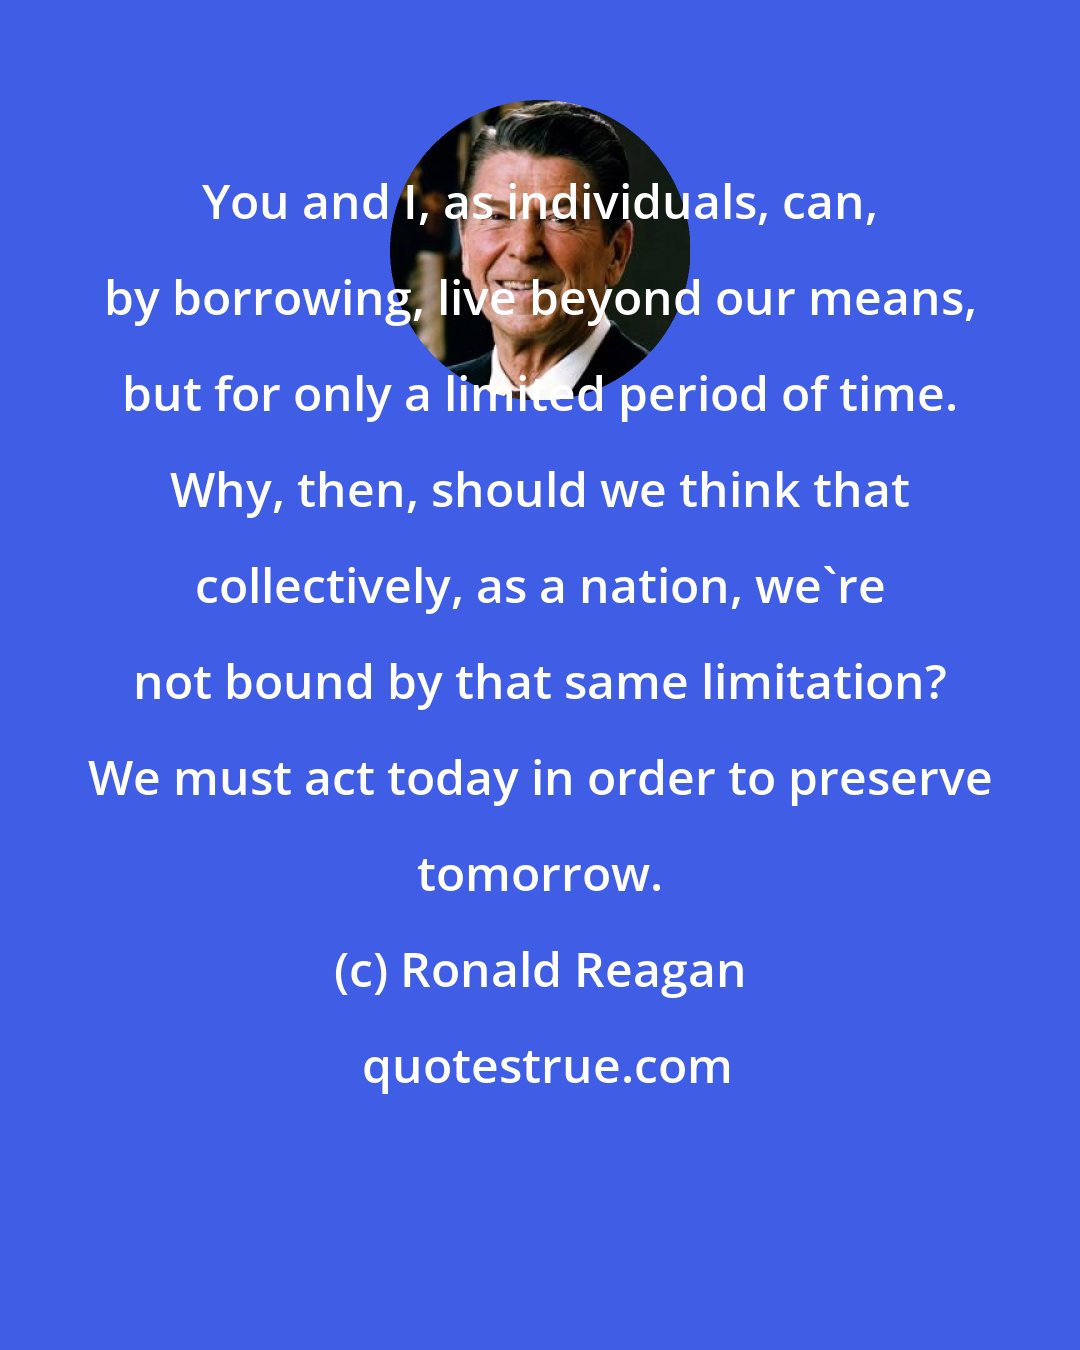 Ronald Reagan: You and I, as individuals, can, by borrowing, live beyond our means, but for only a limited period of time. Why, then, should we think that collectively, as a nation, we're not bound by that same limitation? We must act today in order to preserve tomorrow.